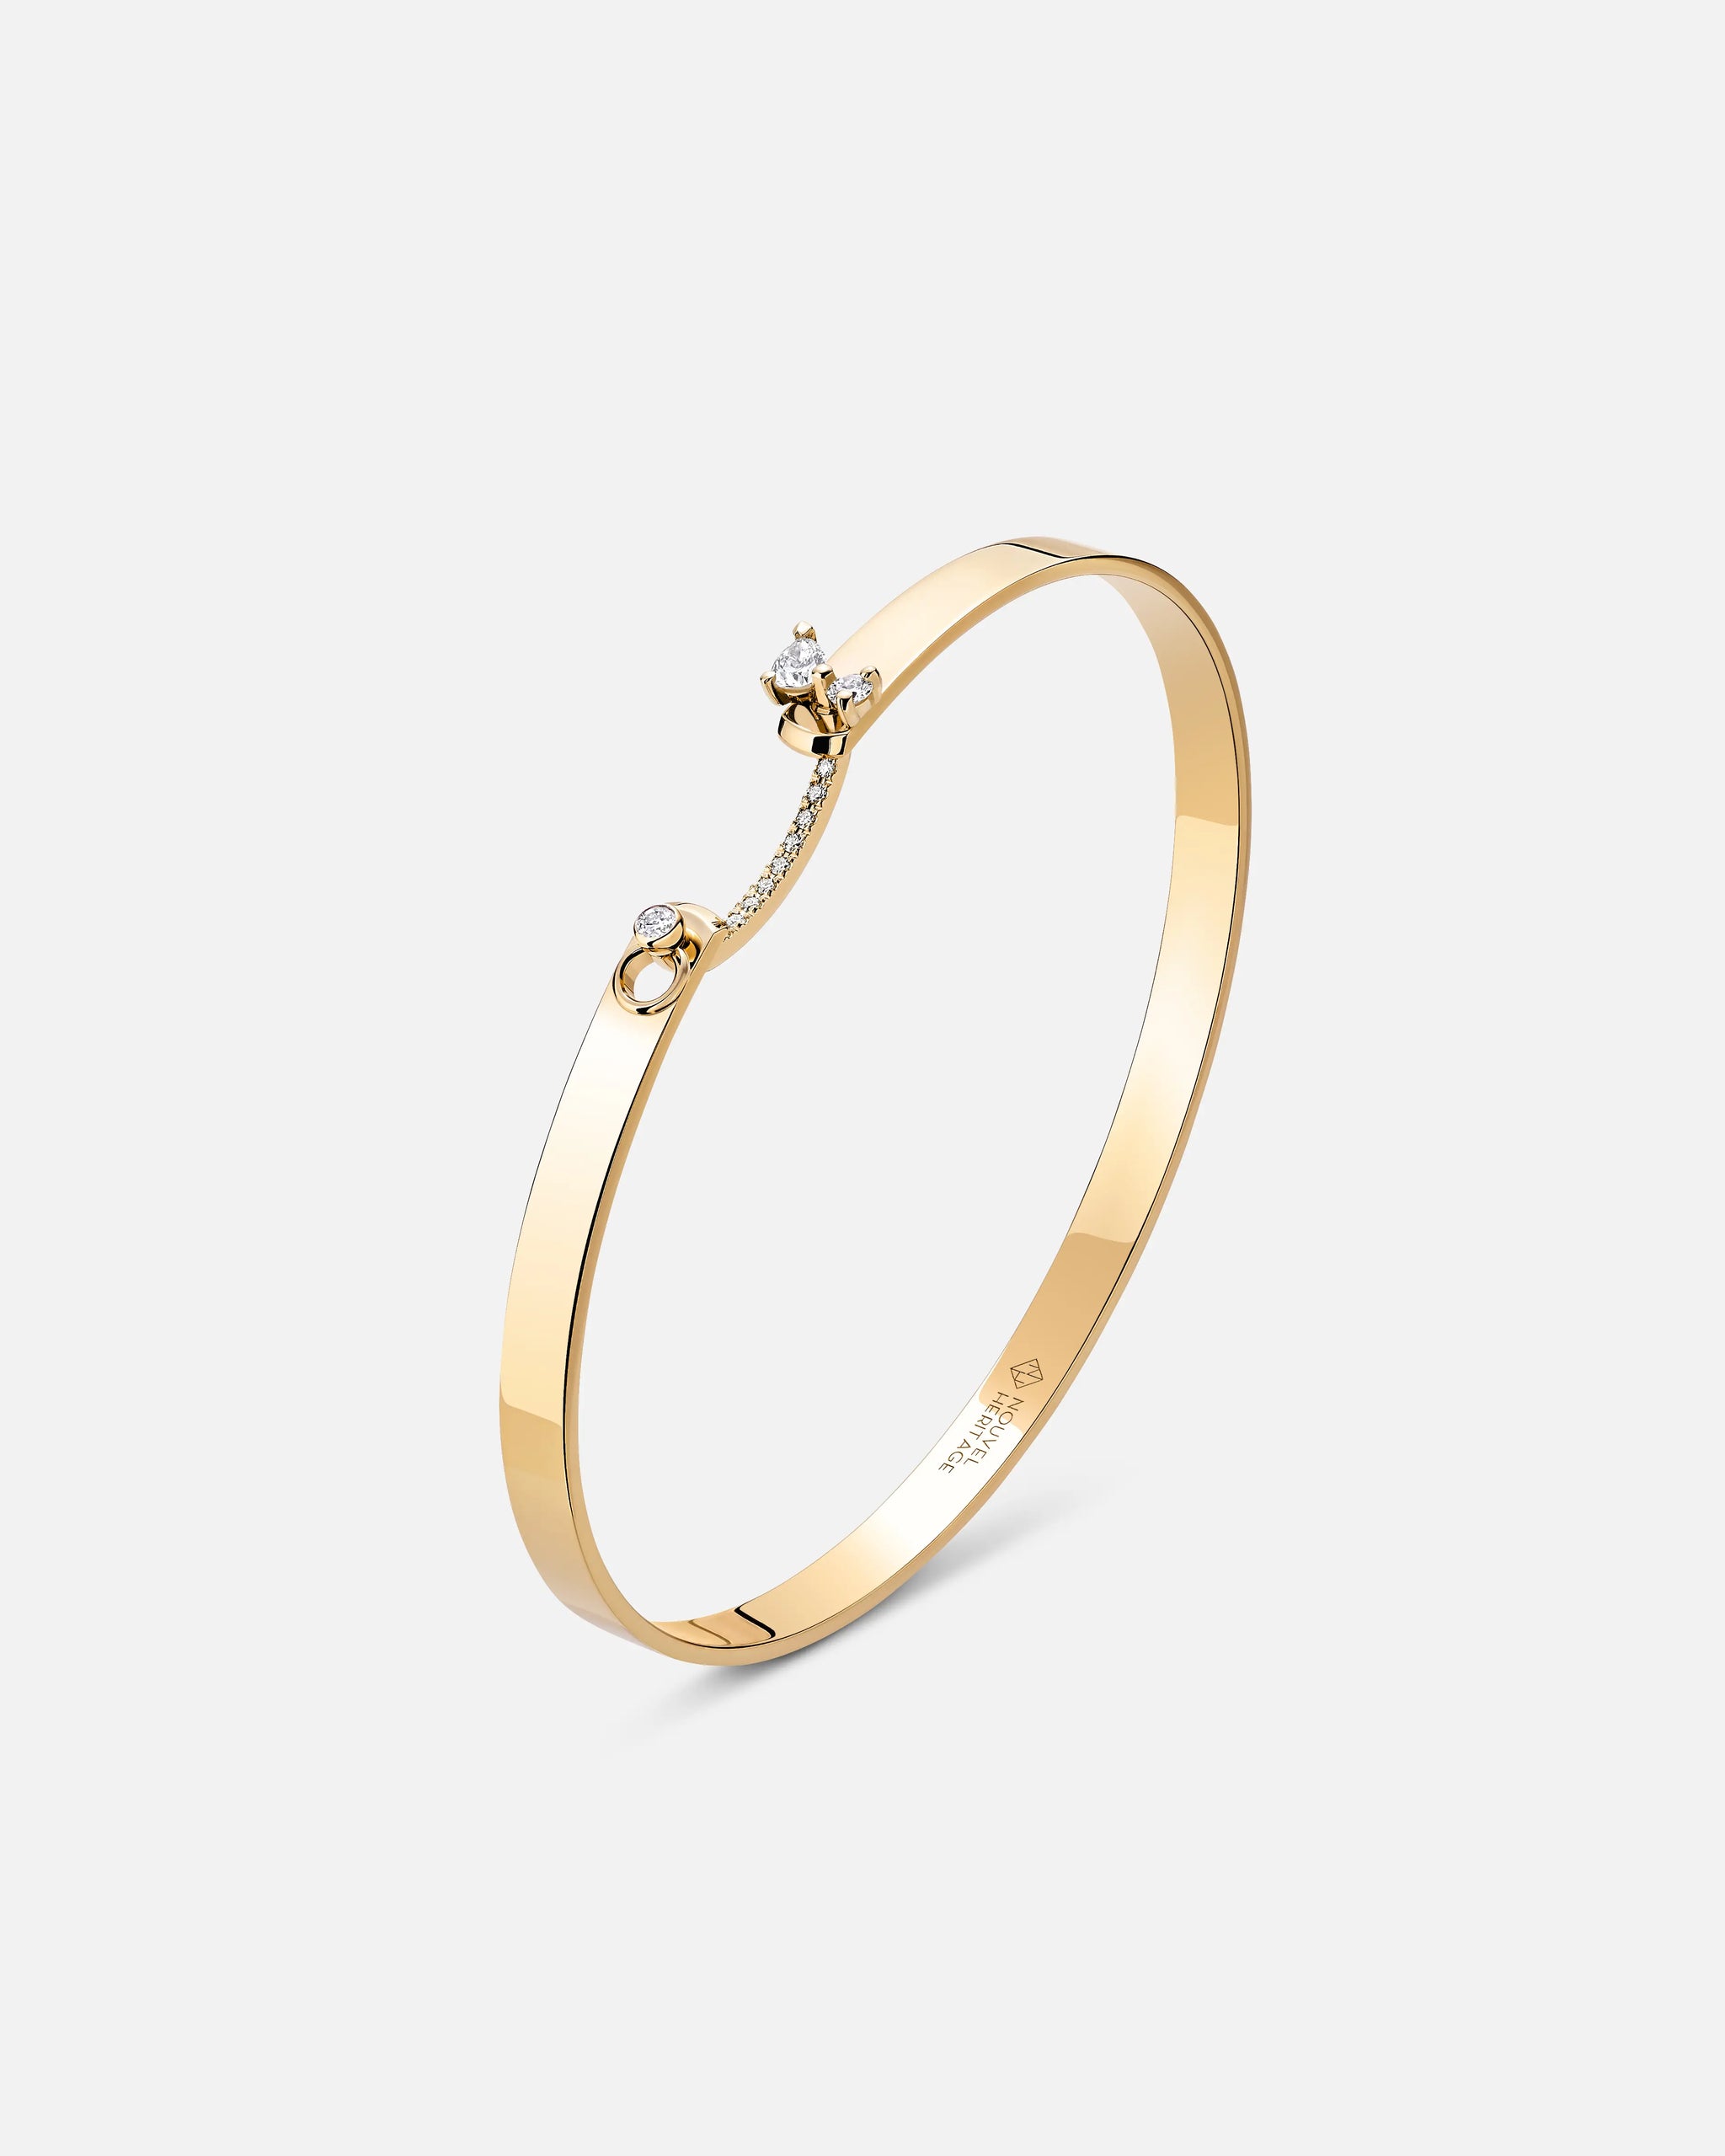 Cocktail Time Mood Bangle in Yellow Gold - 1 - Nouvel Heritage